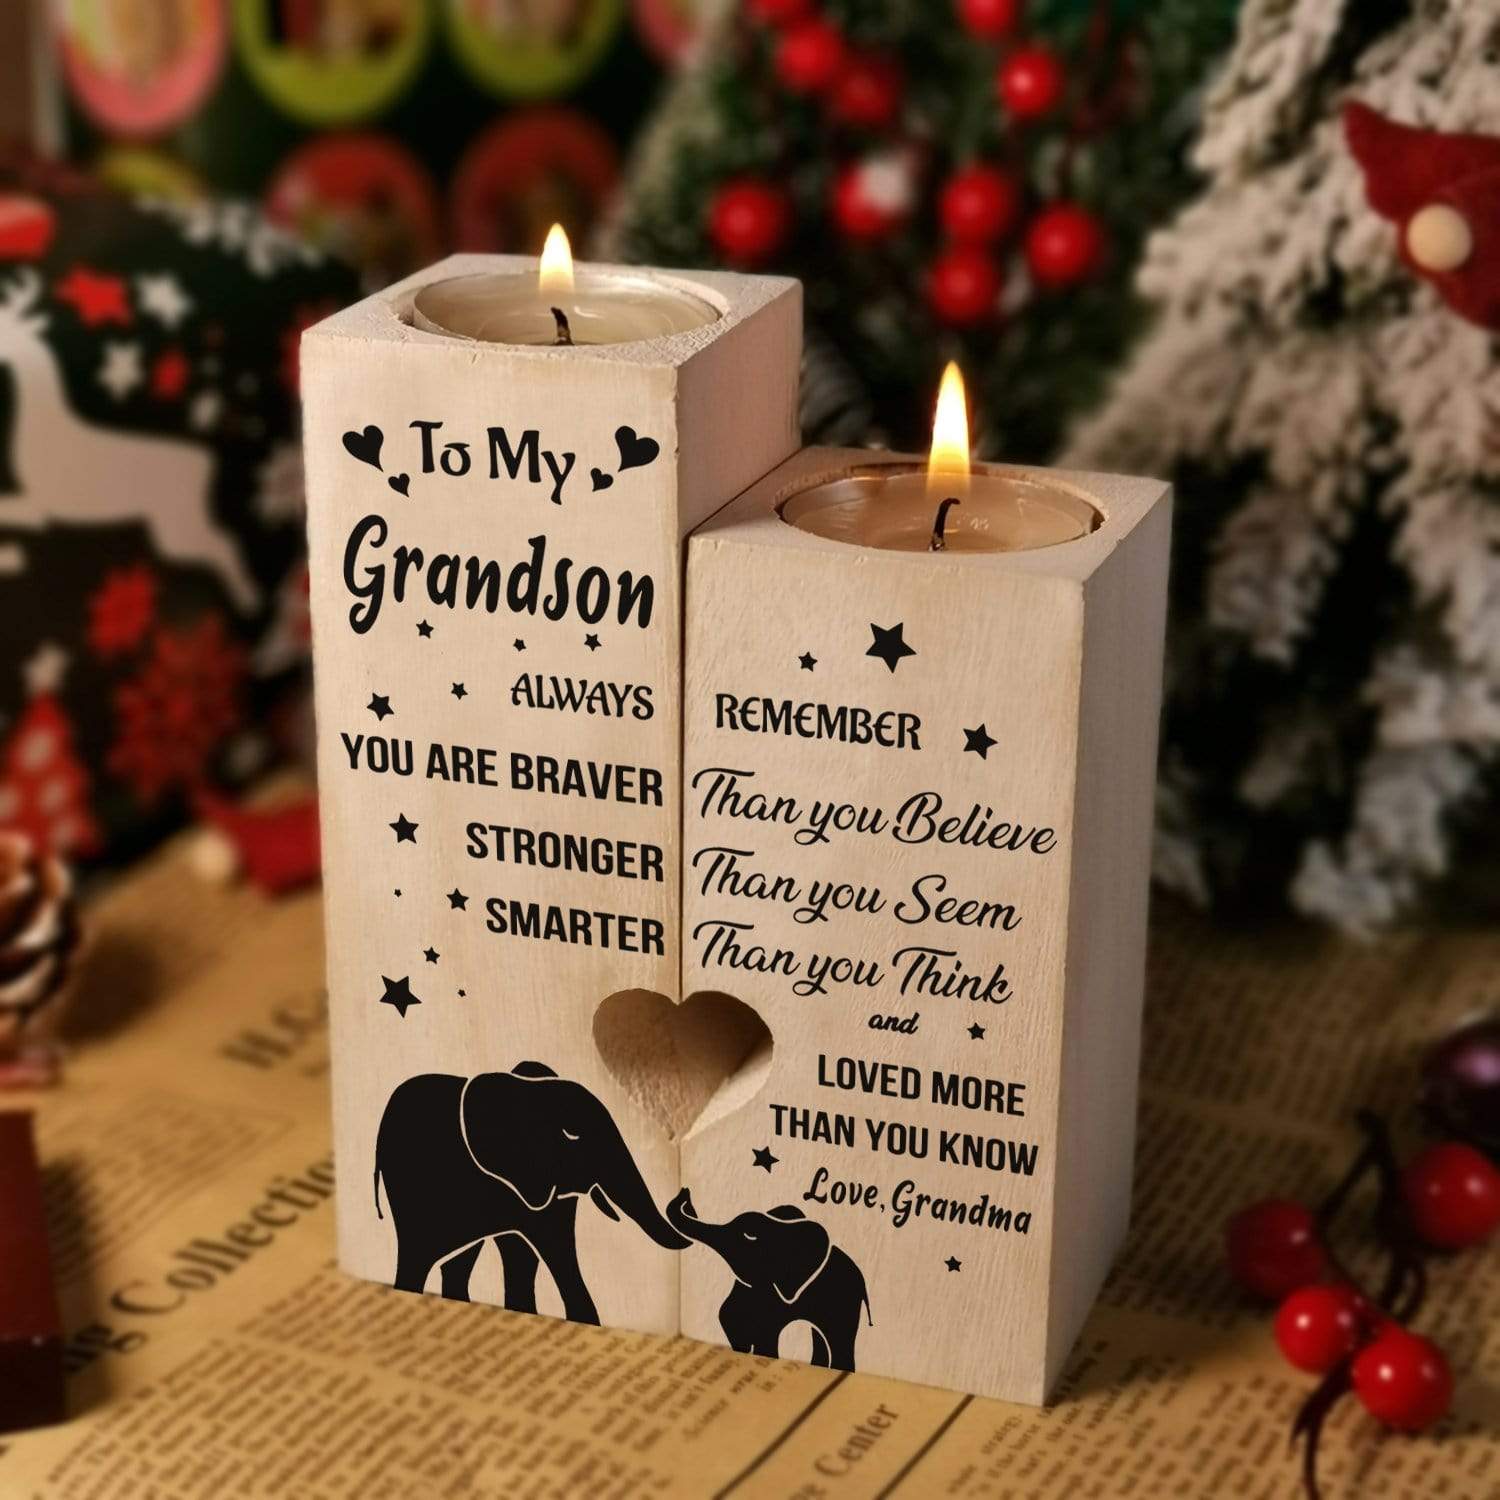 Candle Holders Grandma To Grandson - You Are Loved More Than You Know Wooden Candle Holders GiveMe-Gifts